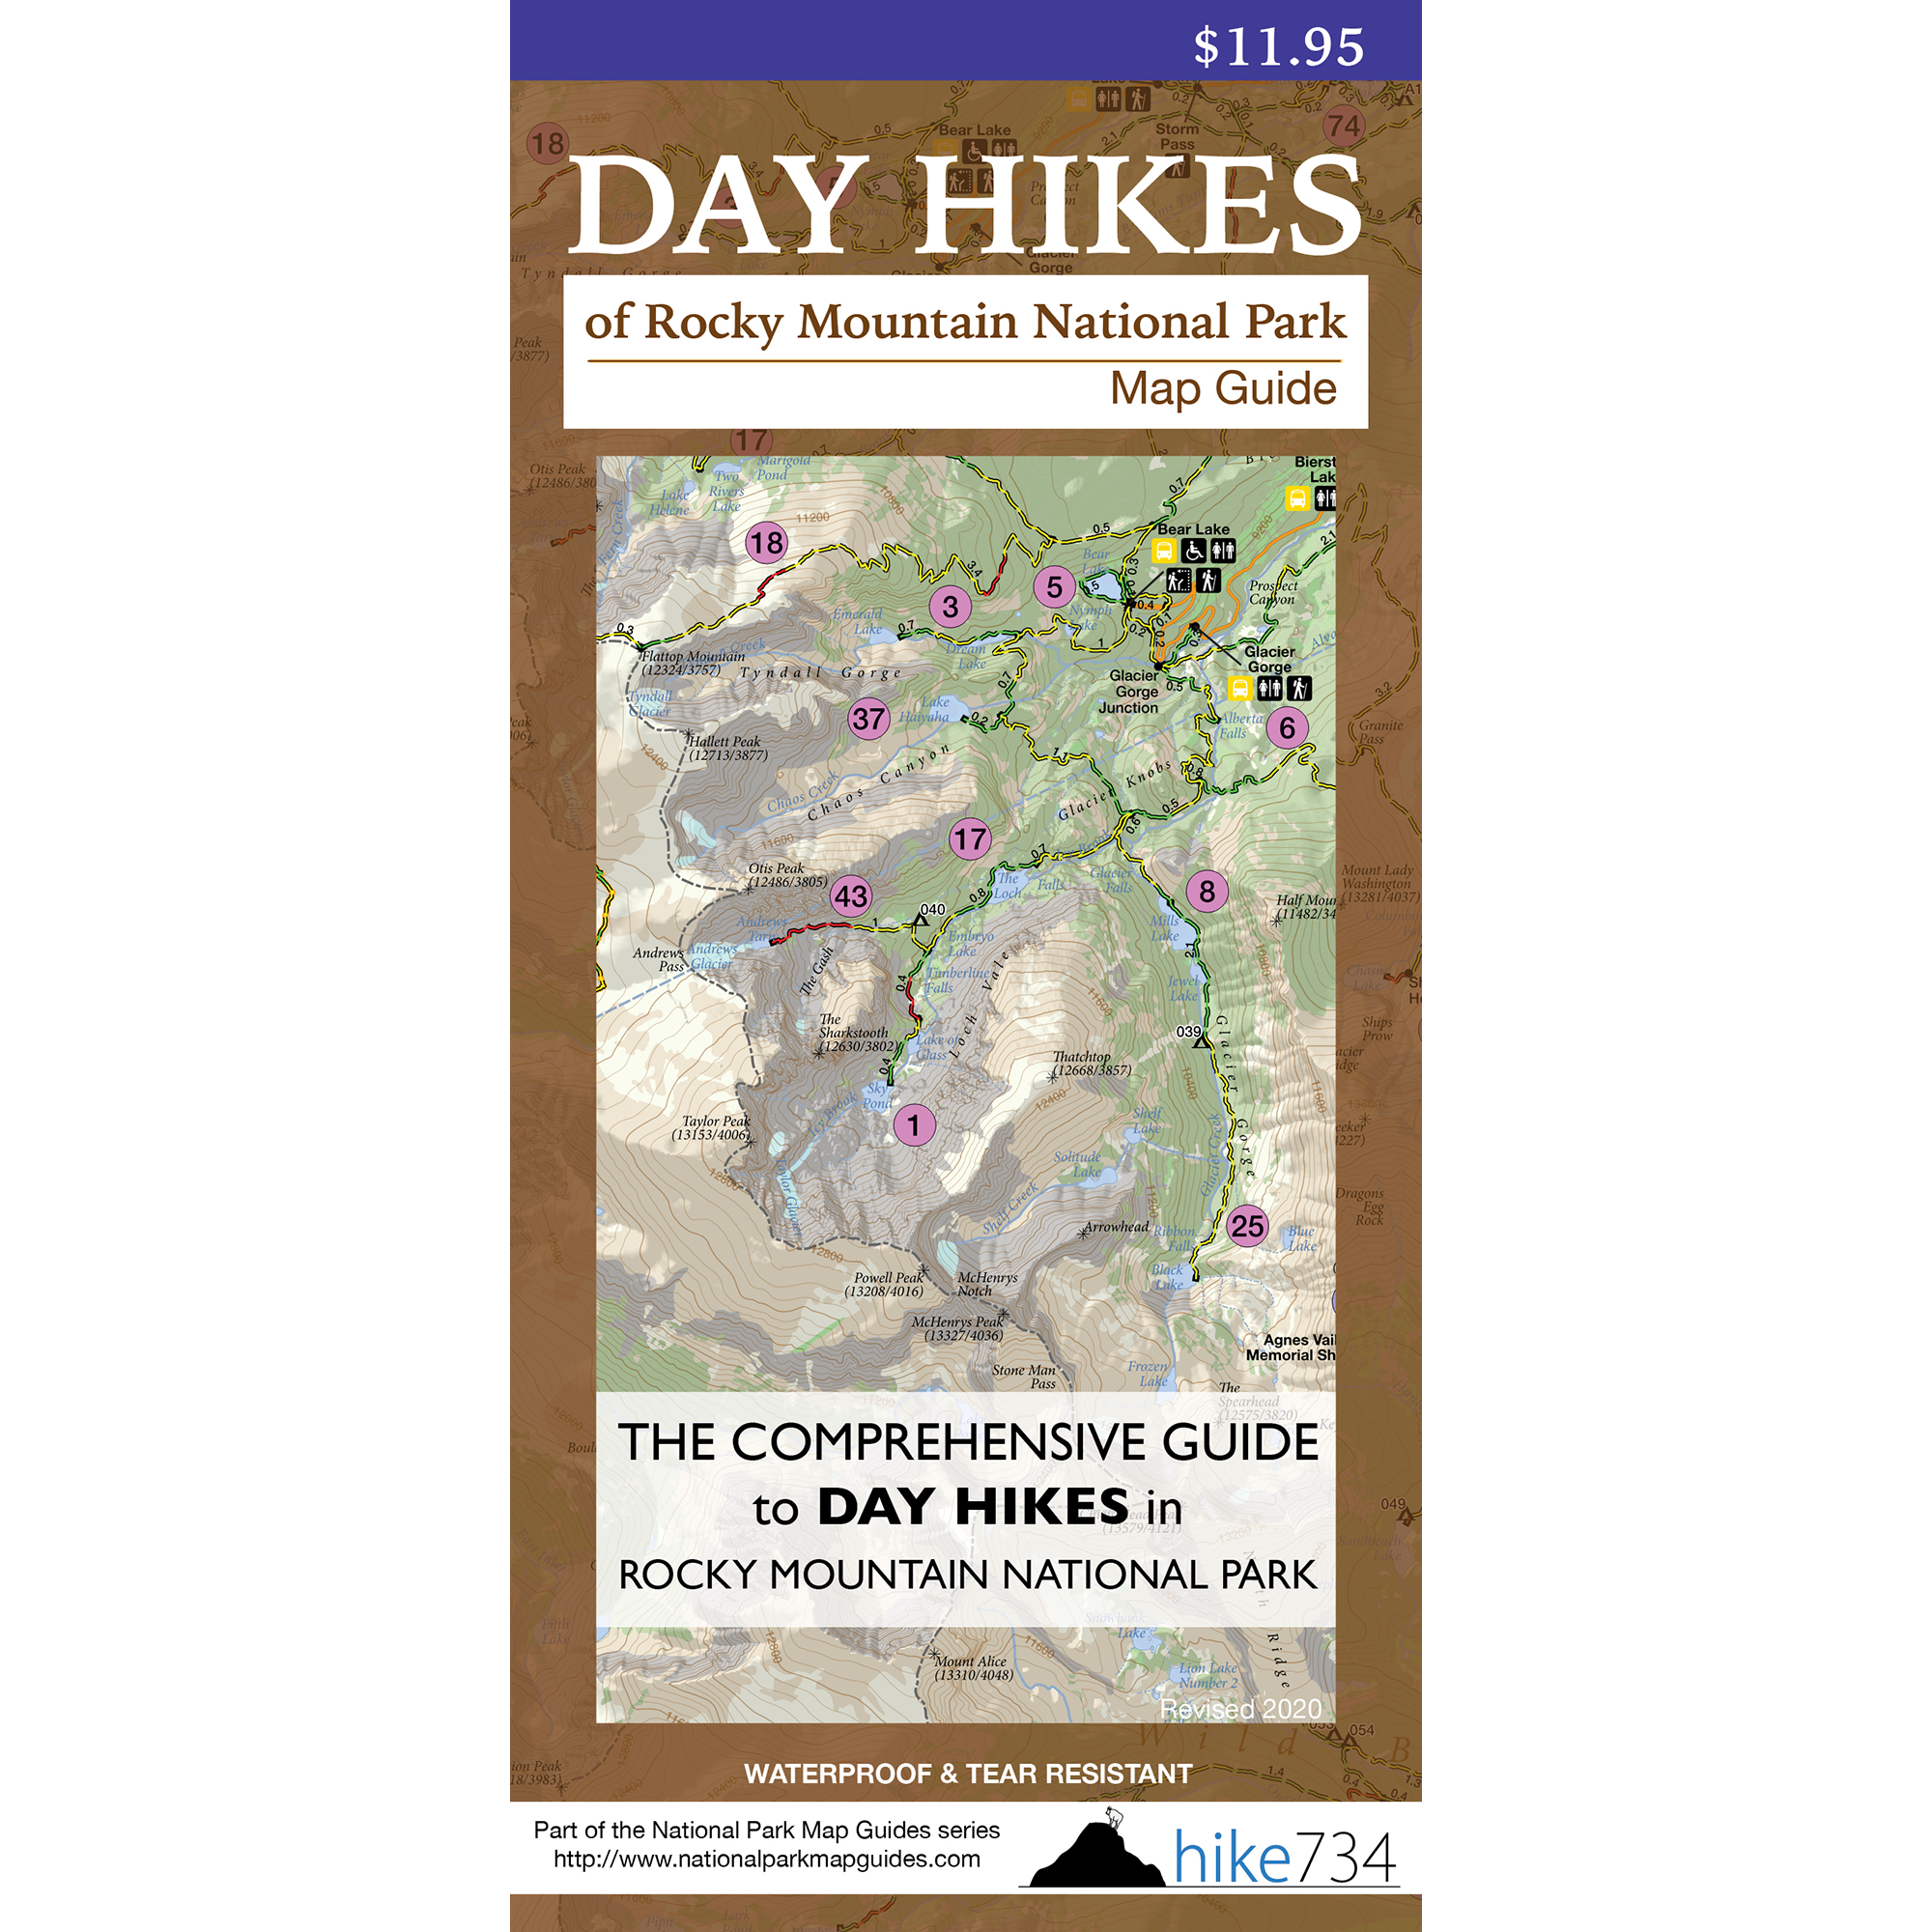 Trail Conditions - Rocky Mountain National Park (U.S. National